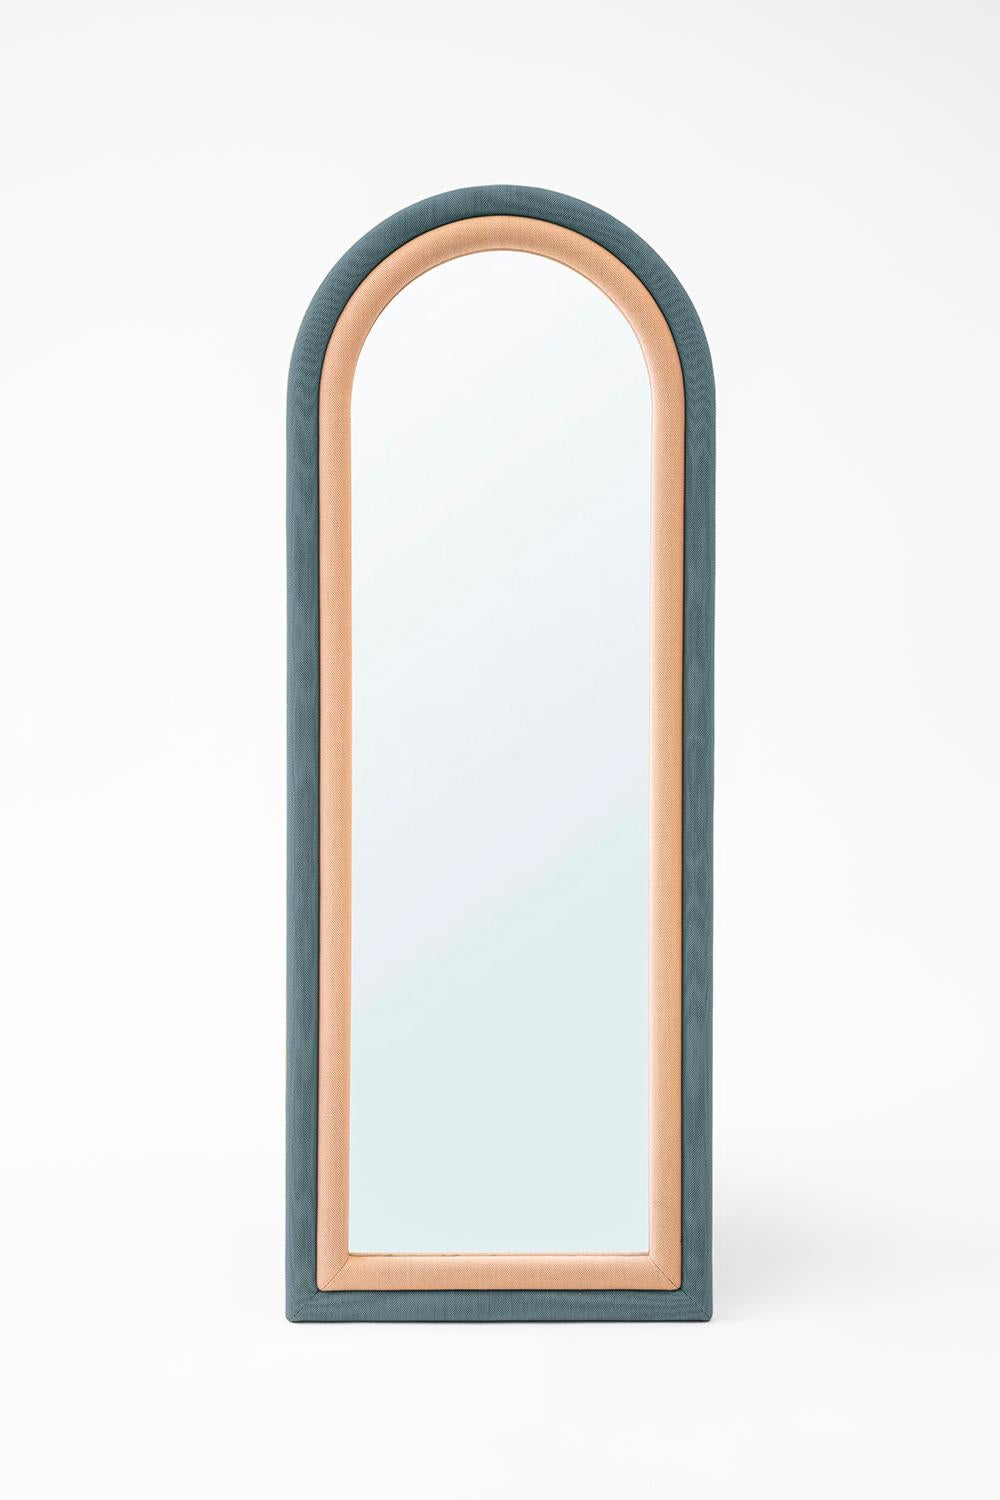 Turkish Contemporary Upholstered Iris Floor Mirror, Blue and Copper For Sale